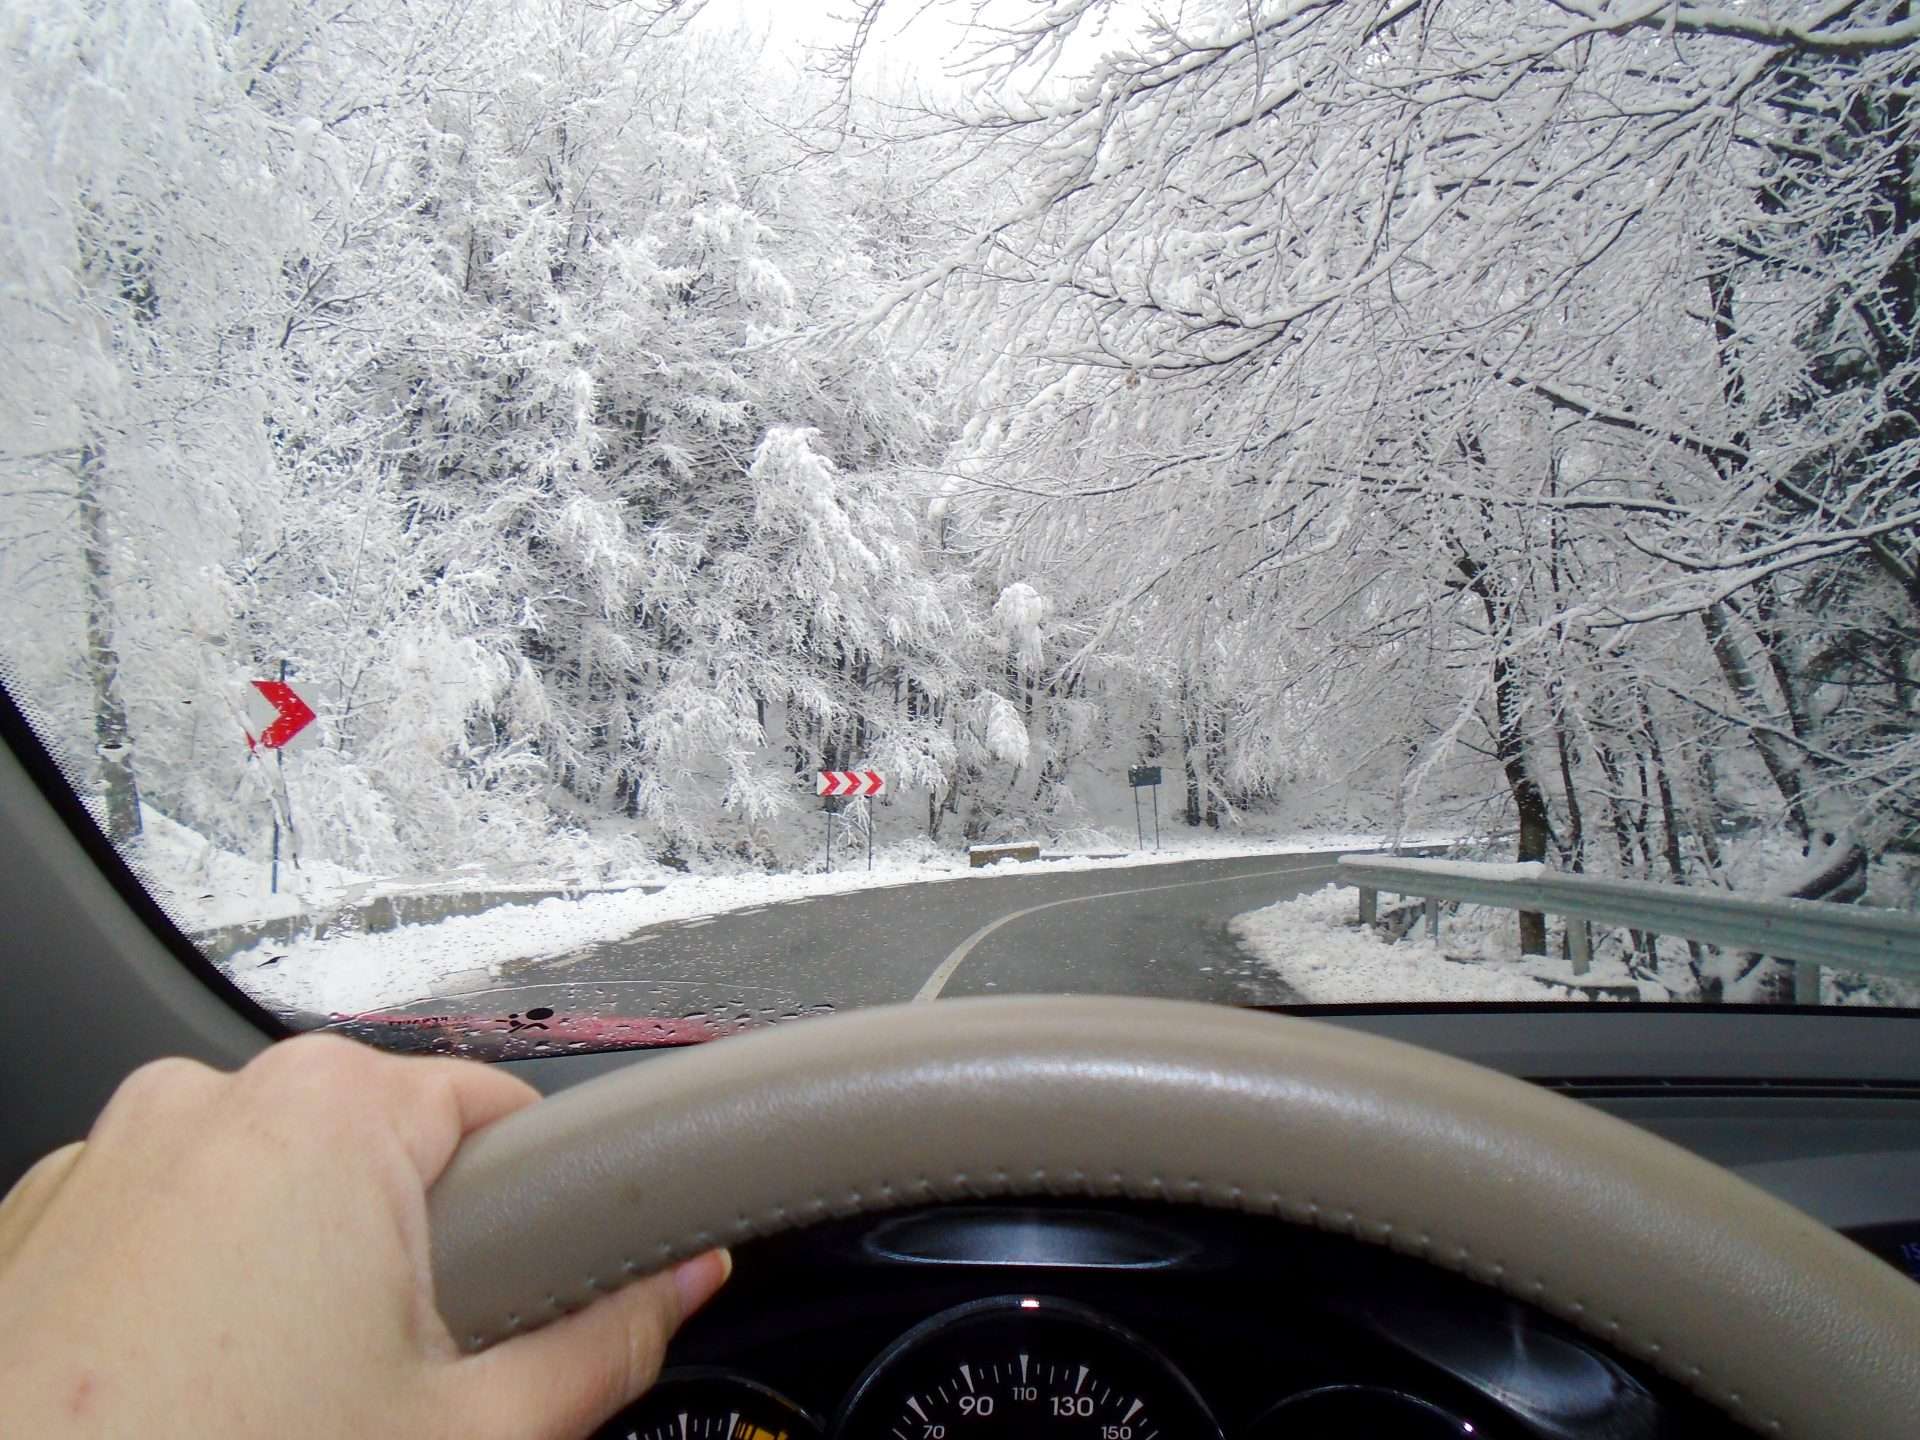 View driving down snowy road